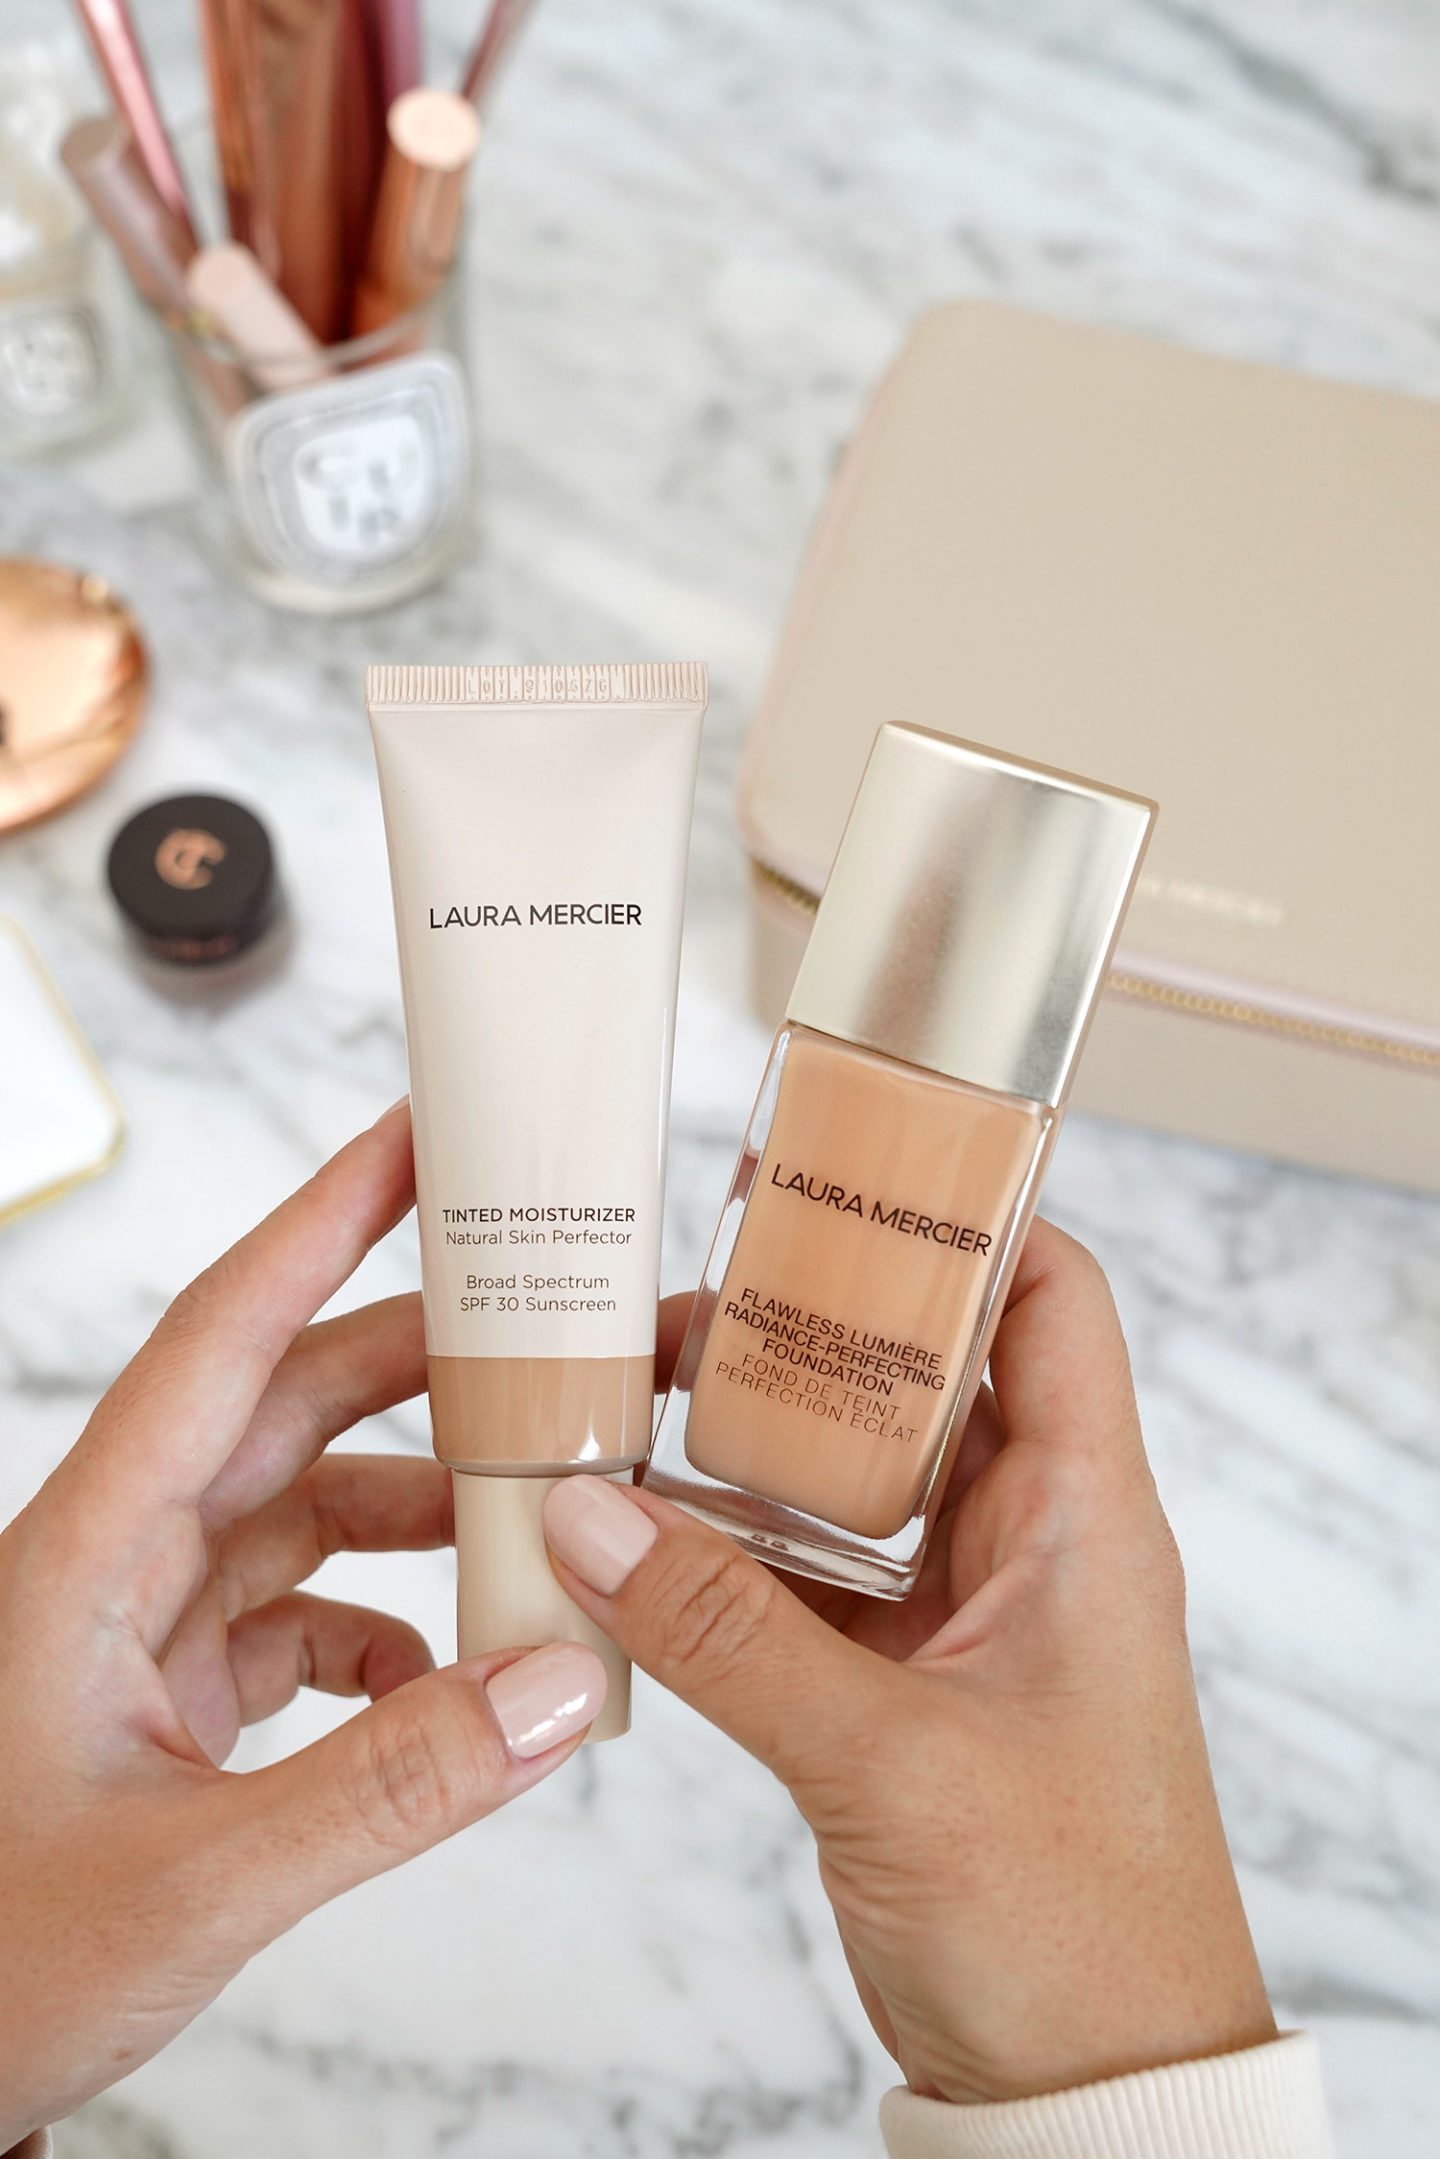 Laura Mercier Tinted Moisturizer and Flawless Lumiere Foundation